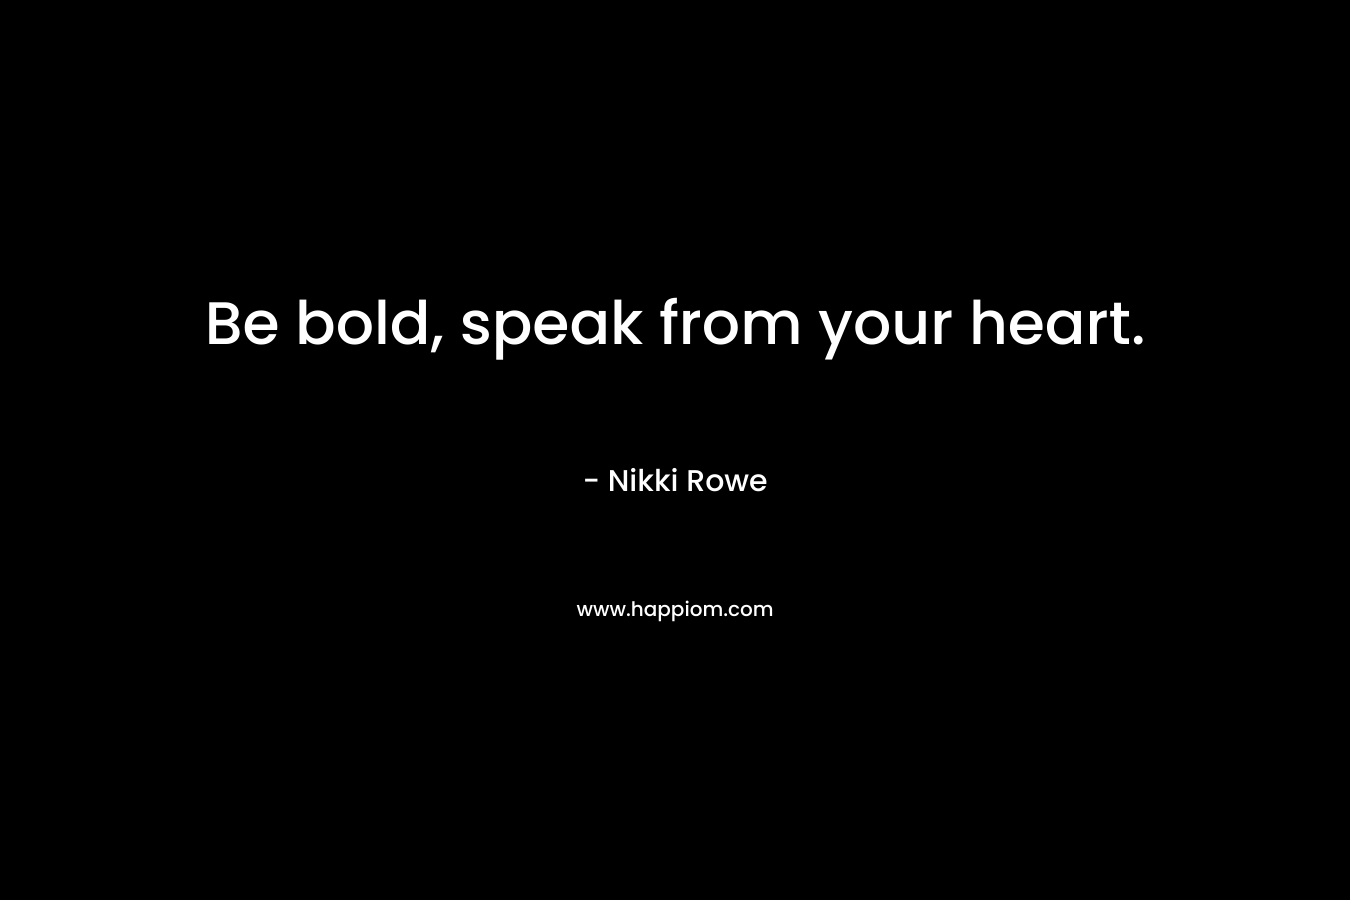 Be bold, speak from your heart.